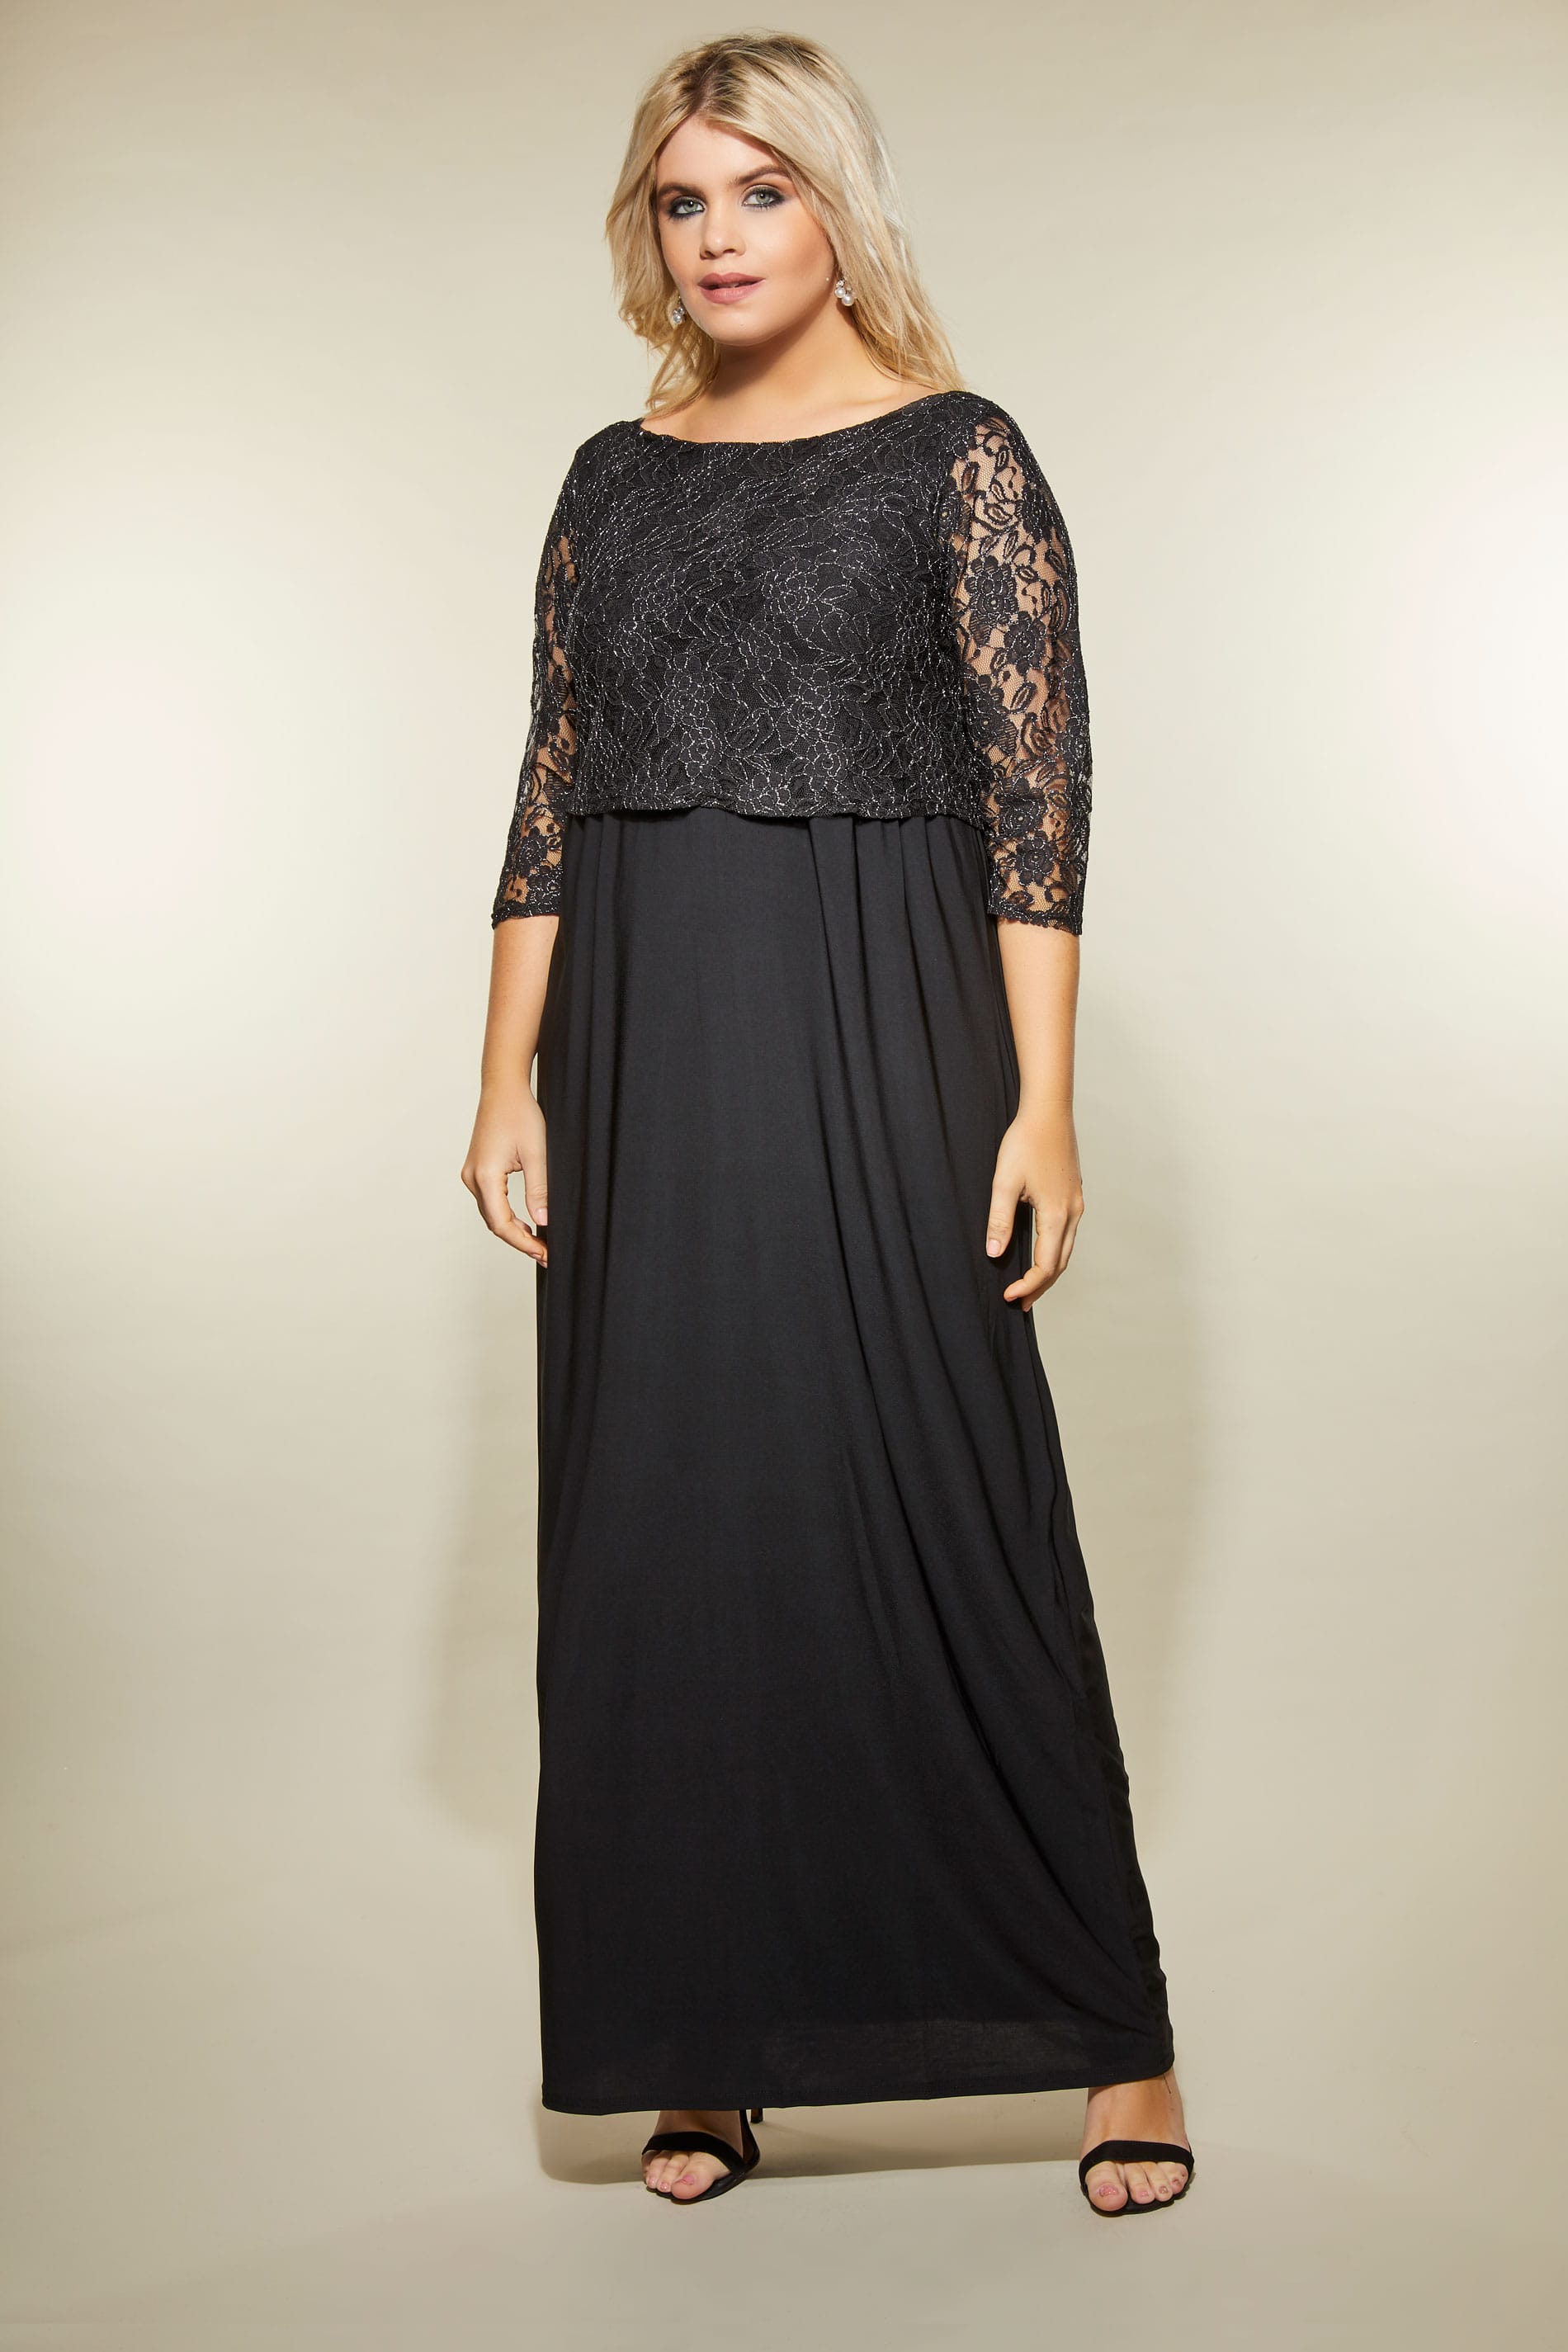 YOURS LONDON Black Metallic Lace Maxi Dress, plus size 16 to 36 | Yours ...